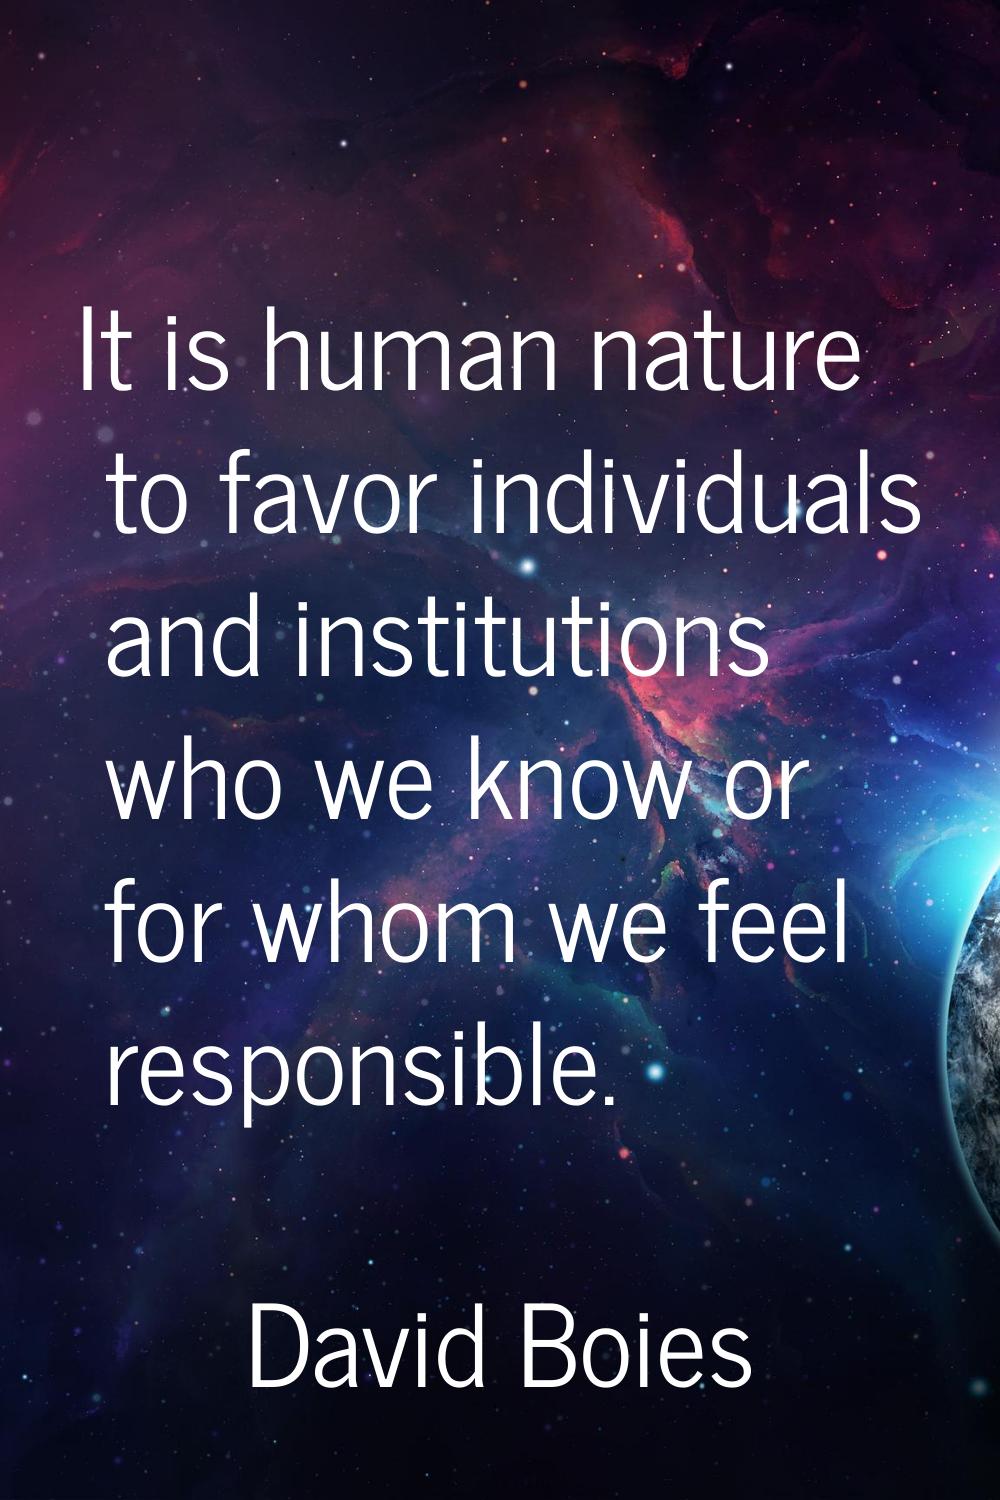 It is human nature to favor individuals and institutions who we know or for whom we feel responsibl